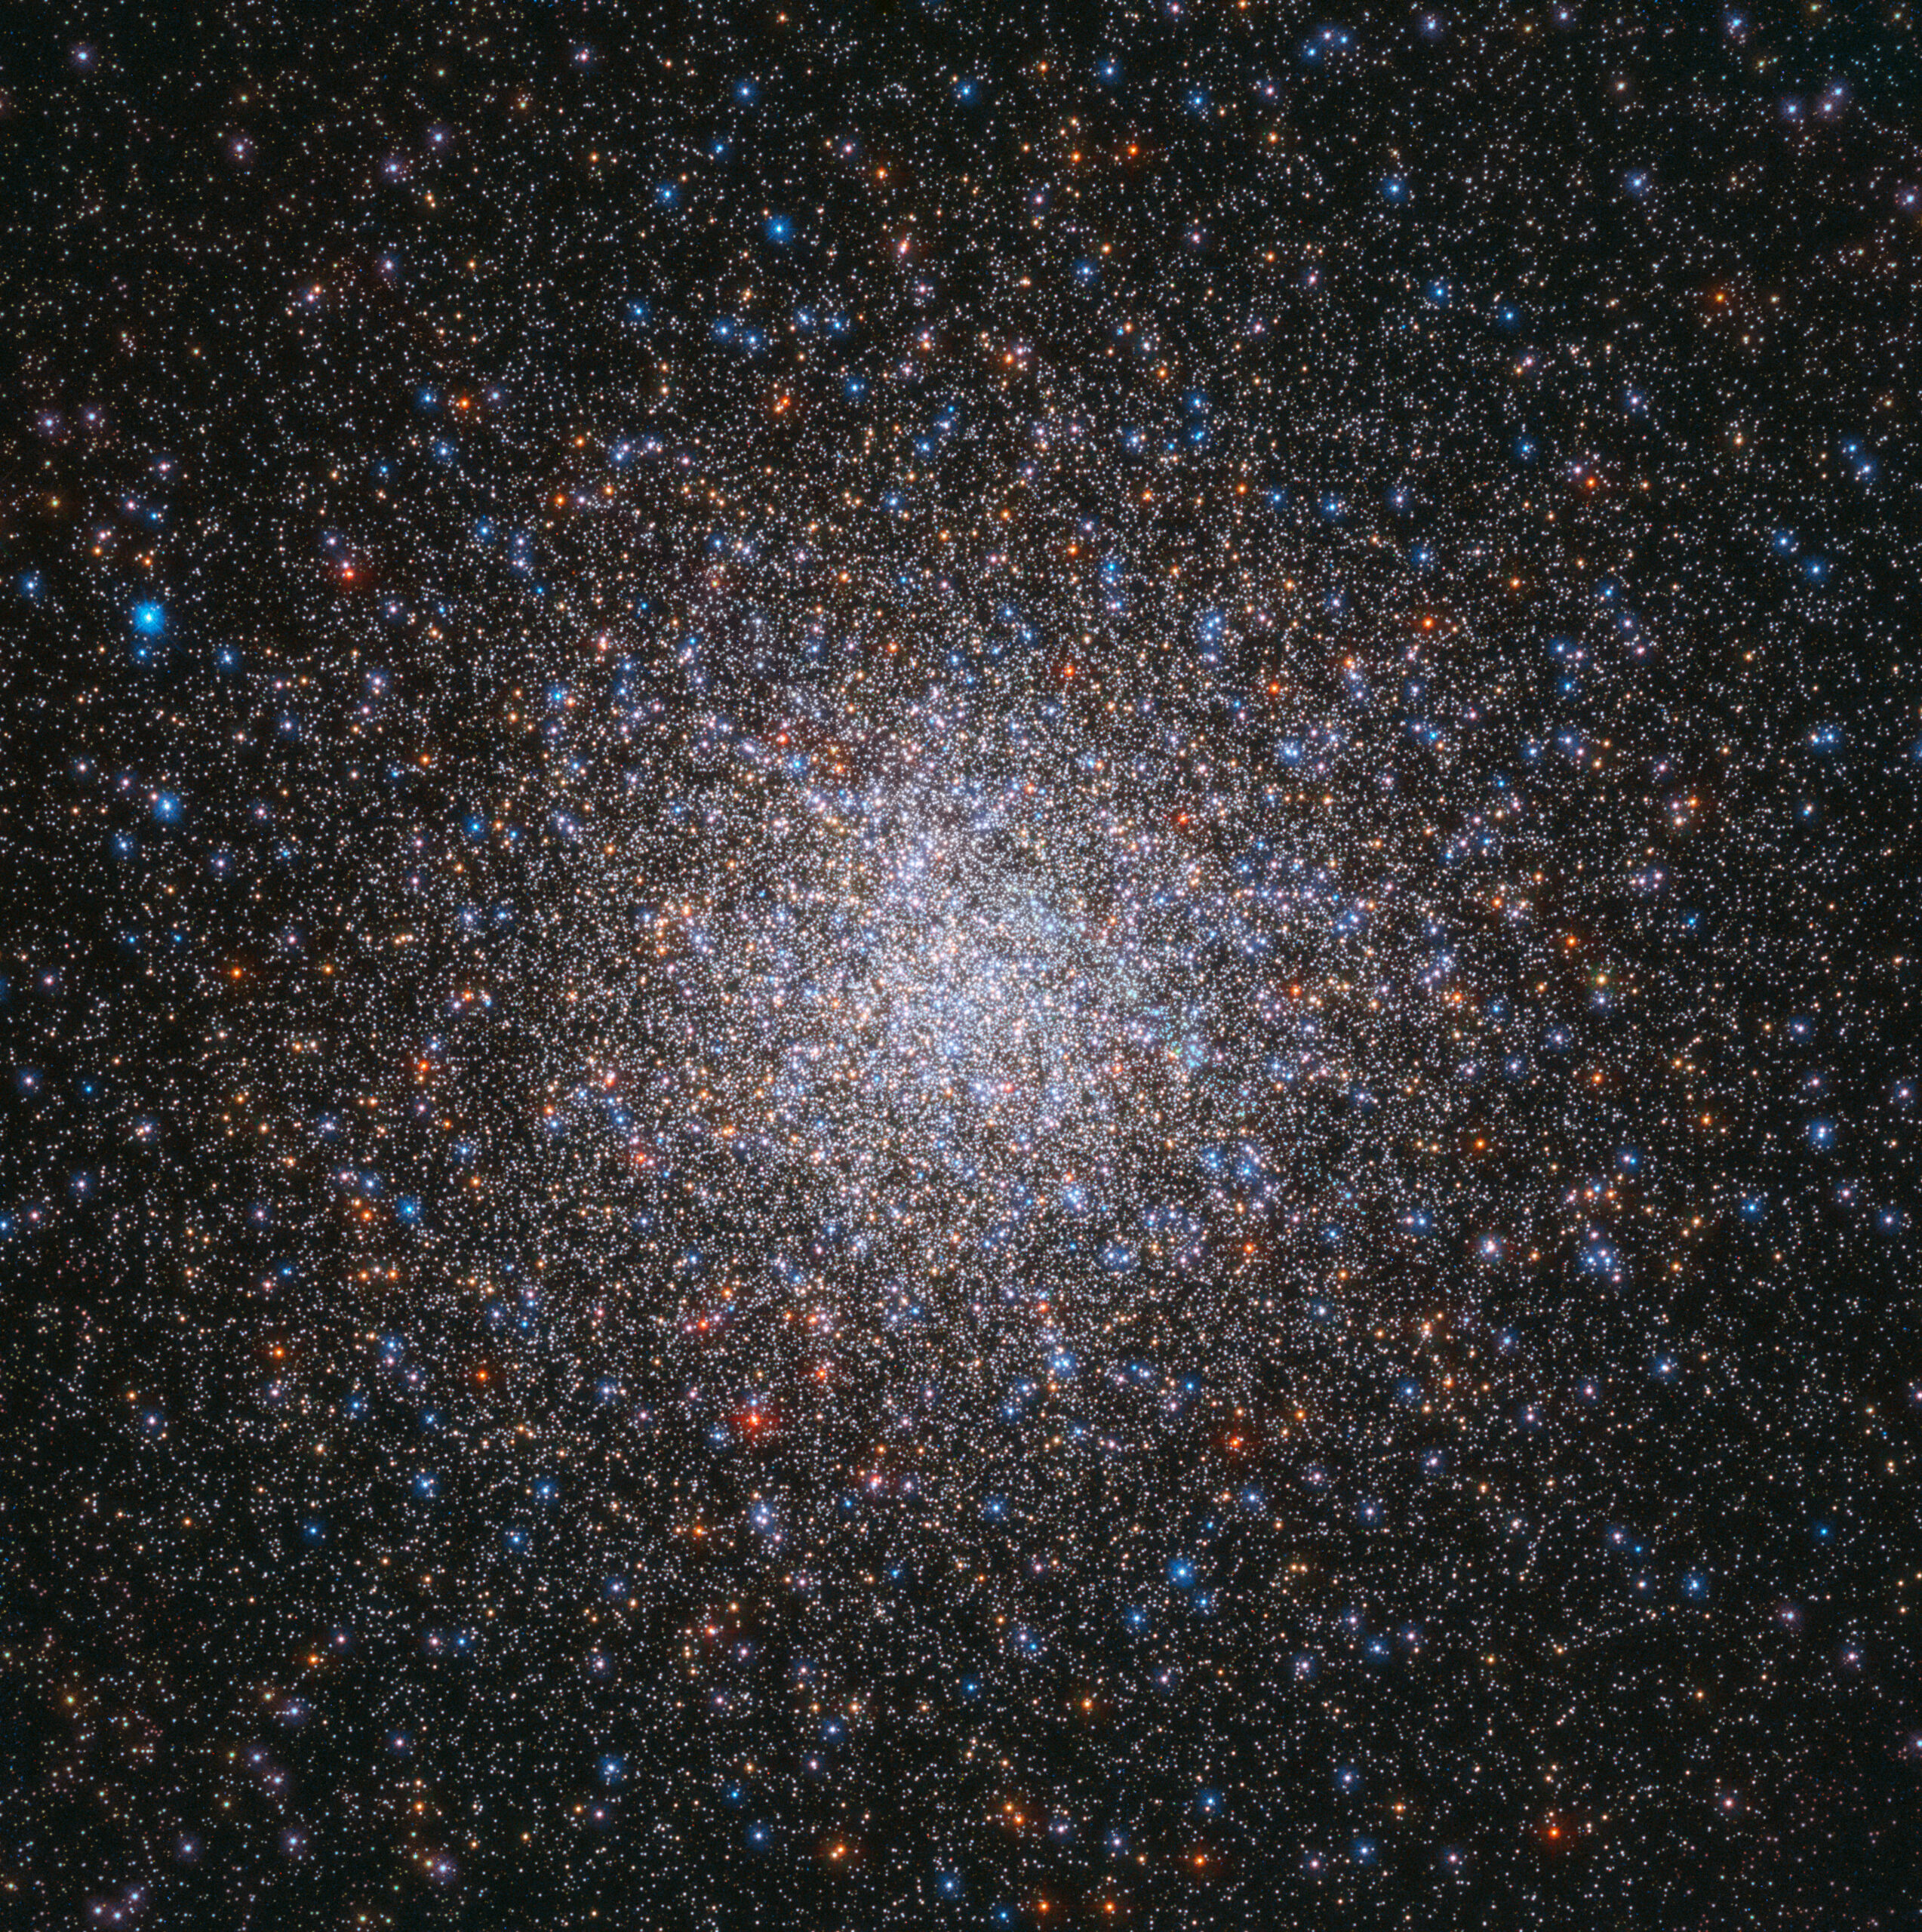 Apod: 2019 April 4 - Messier 2  Apod Astronomy Picture Of The Day Archive